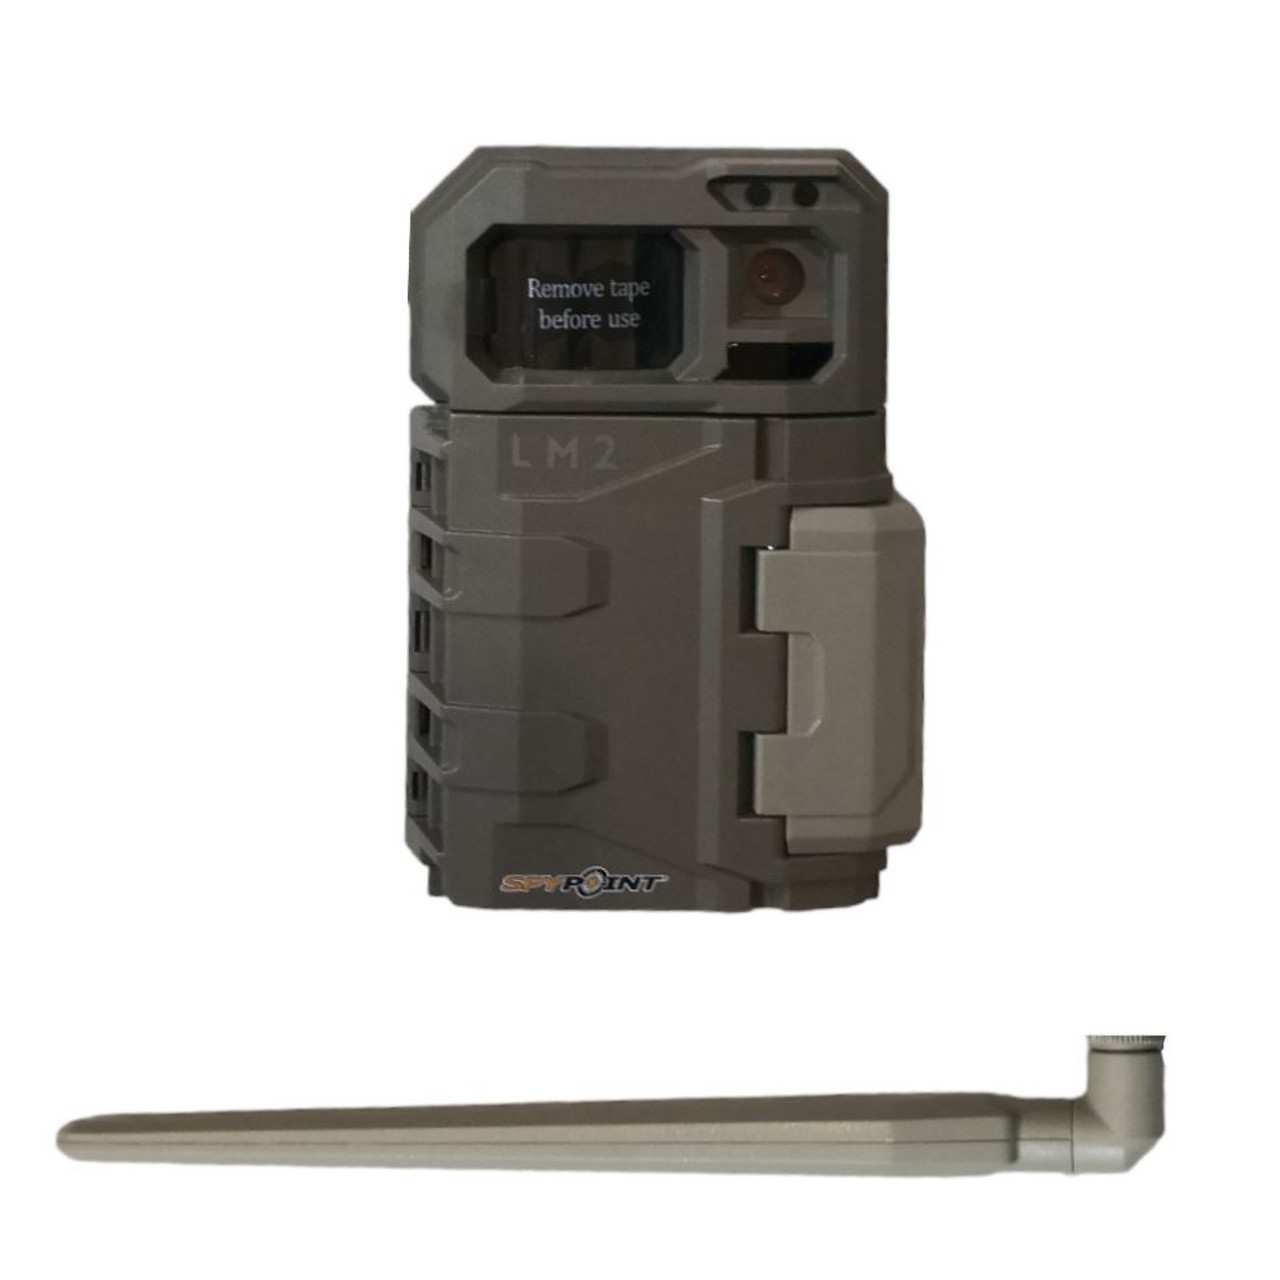 SpyPoint LM2 Cellular SMS Trail Nature Camera (2 camera pack)